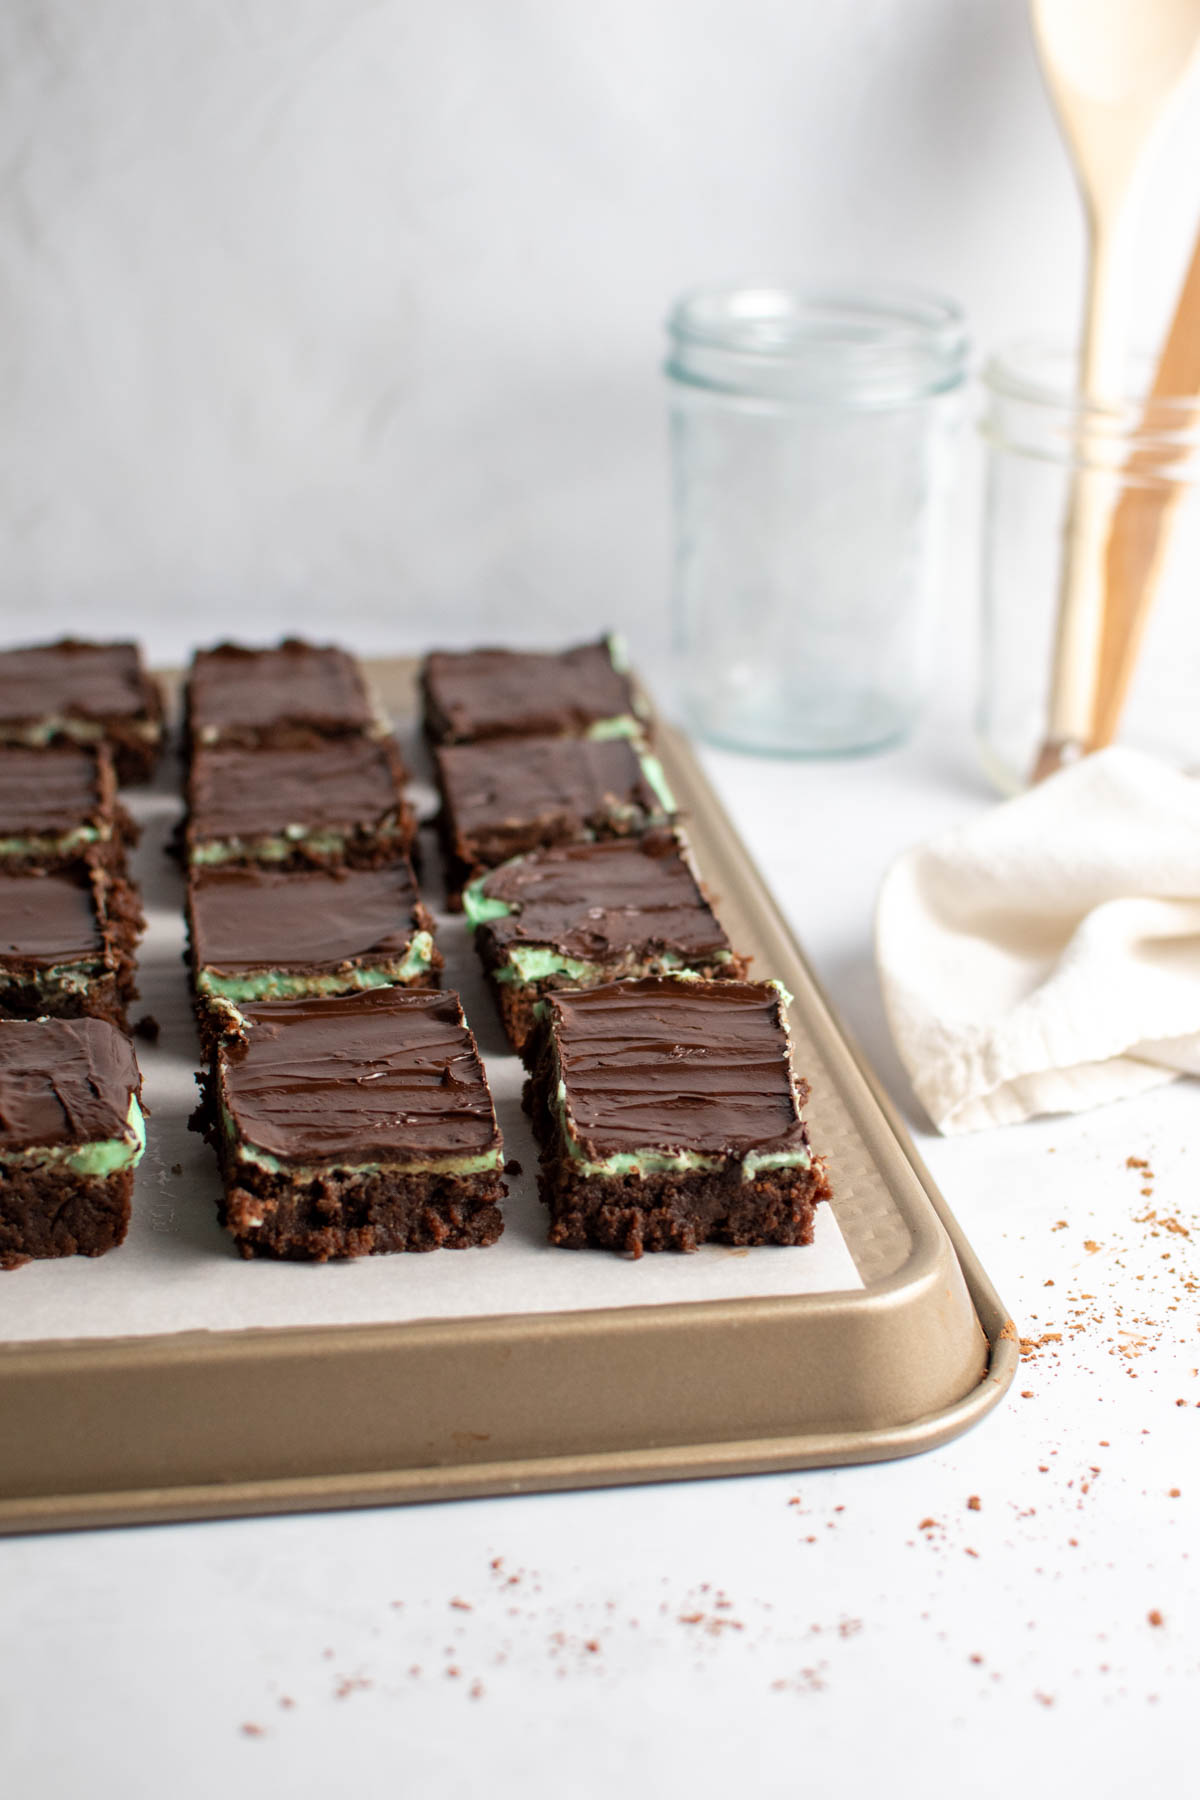 Several mint chocolate brownies on piece of parchment paper on baking sheet with utensils in background.